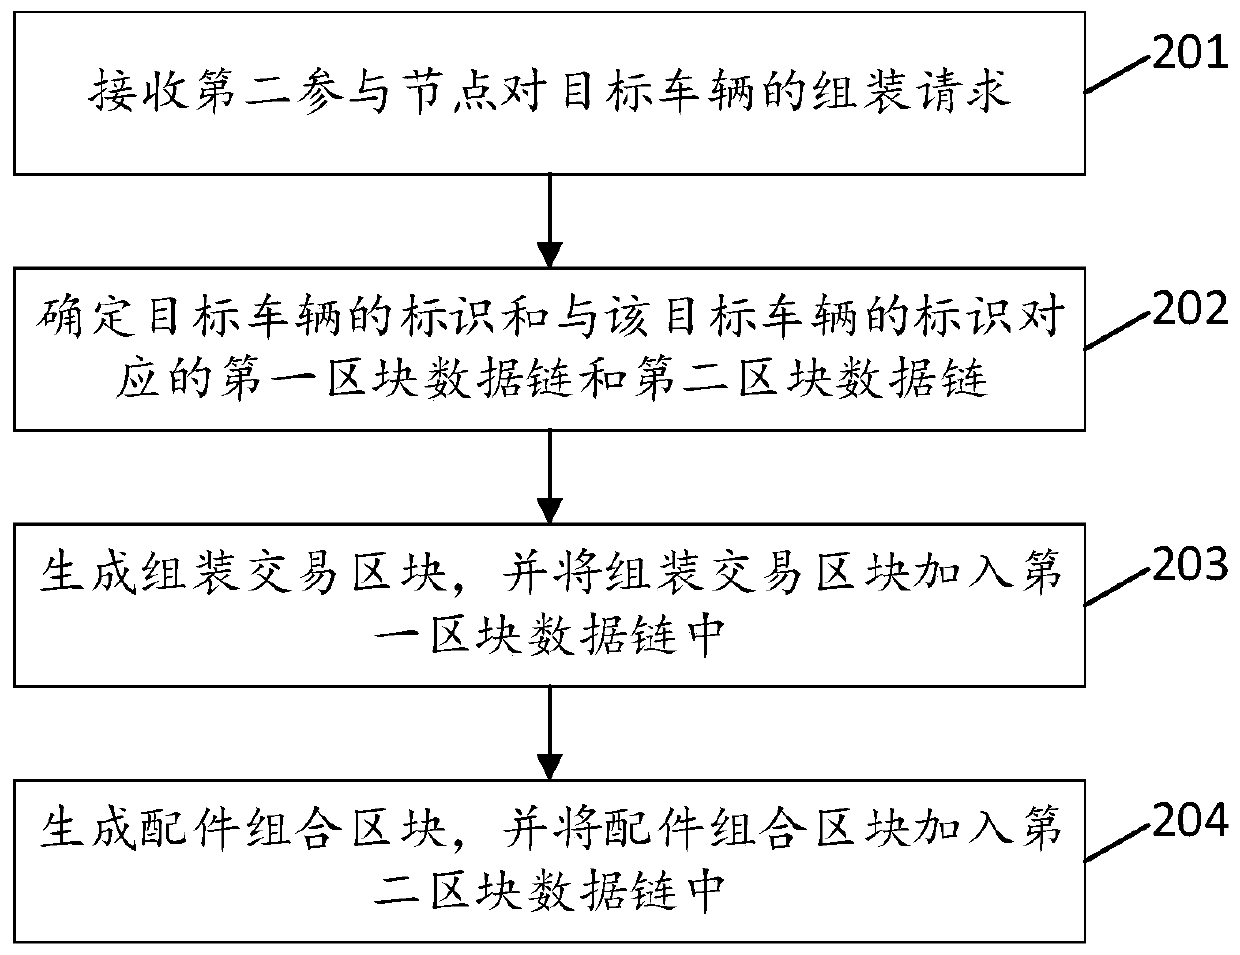 Vehicle data management method and device based on block chain